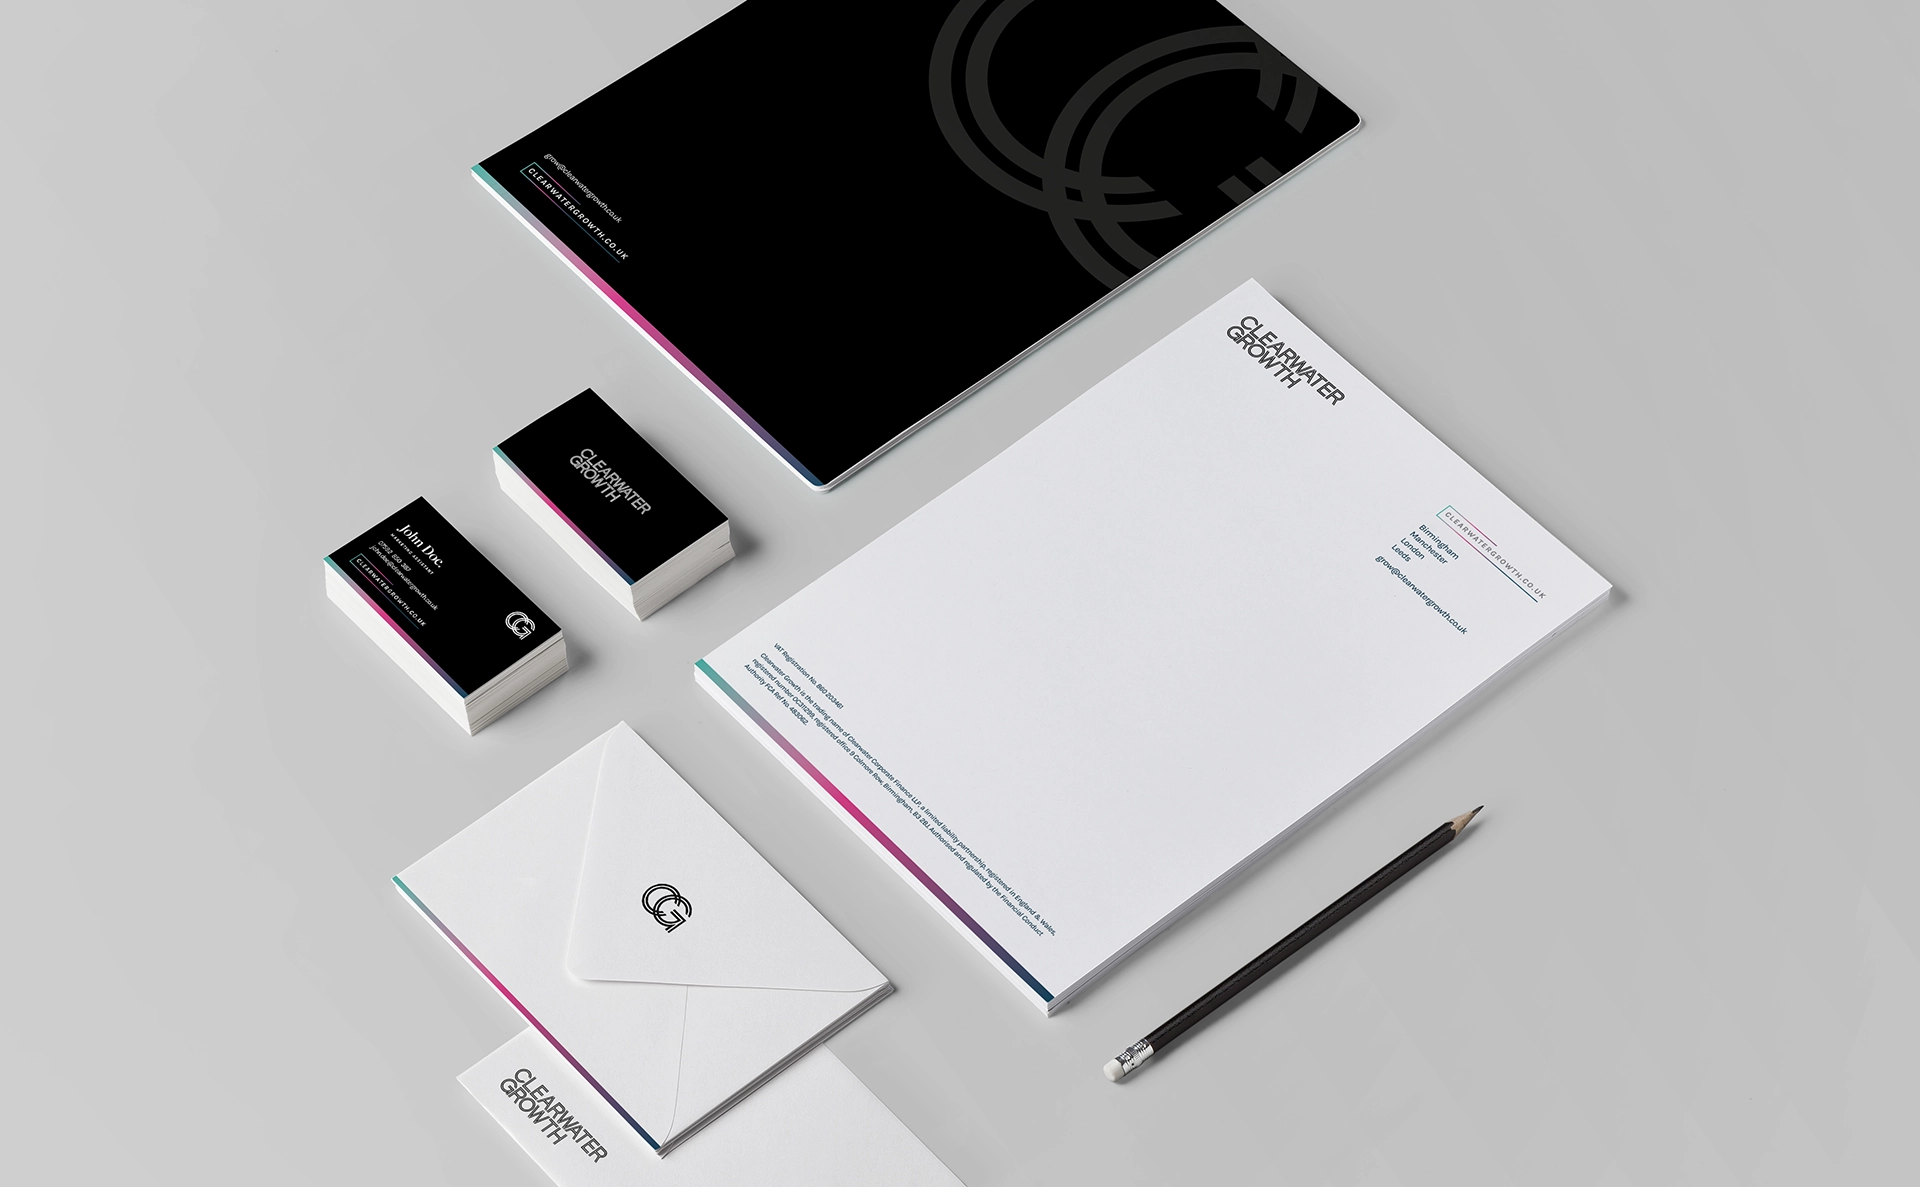 Clearwater Growth stationery